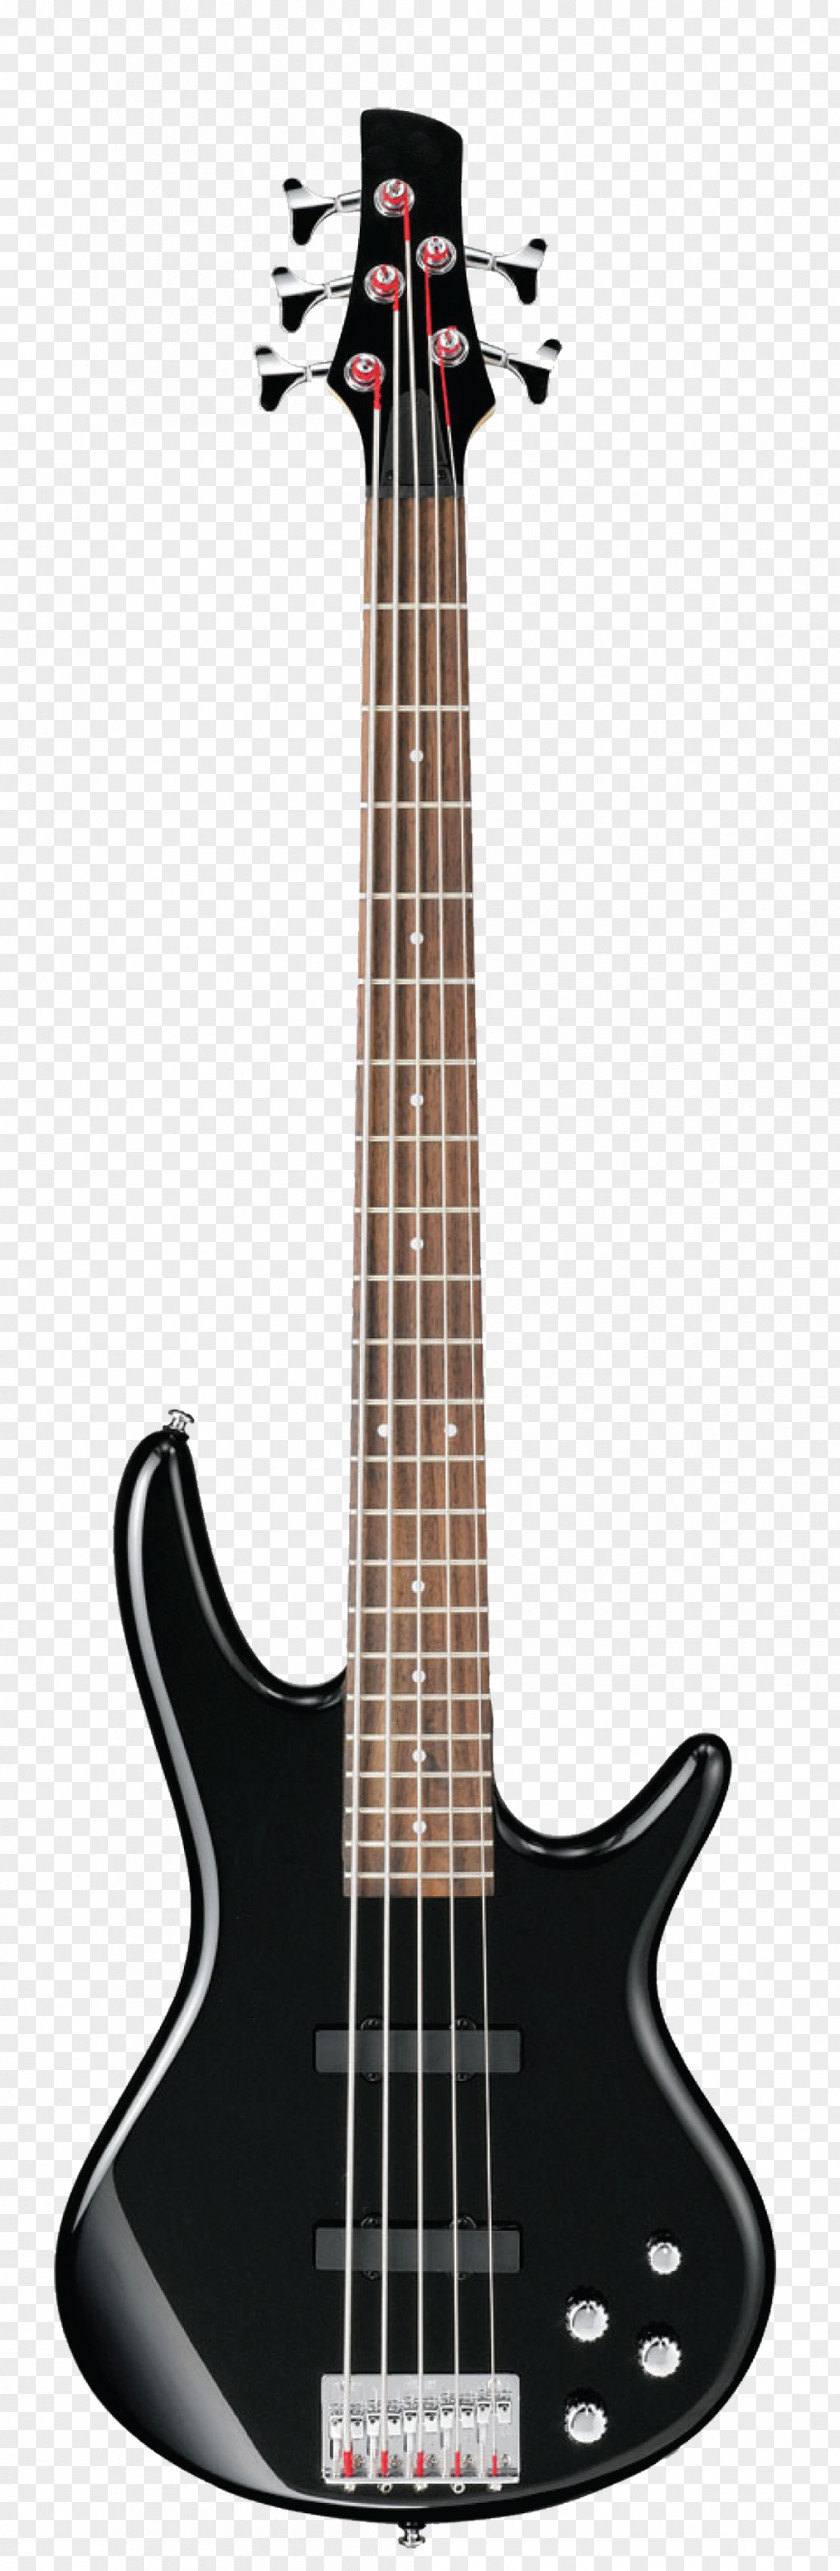 Bass Ibanez Guitar Double Electric PNG